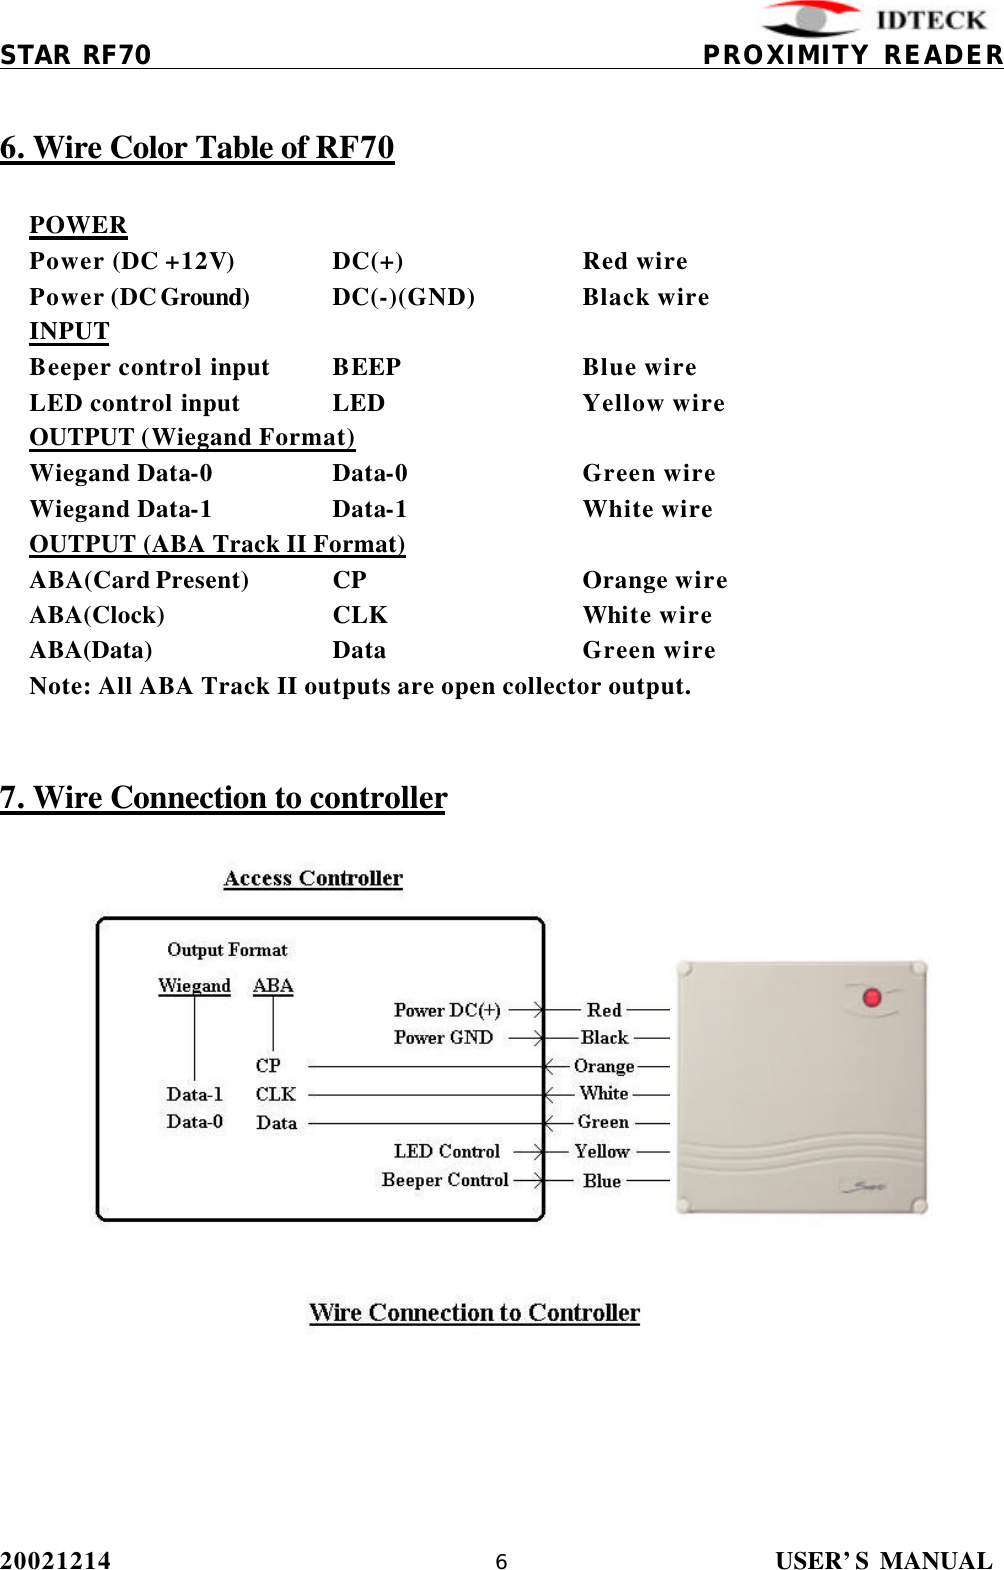          STAR RF70                                           PROXIMITY READER 20021214                USER’S MANUAL 6  6. Wire Color Table of RF70   POWER  Power (DC +12V)    DC(+)   Red wire  Power (DC Ground) DC(-)(GND)    Black wire  INPUT  Beeper control input BEEP        Blue wire  LED control input   LED        Yellow wire  OUTPUT (Wiegand Format)  Wiegand Data-0    Data-0     Green wire  Wiegand Data-1    Data-1     White wire  OUTPUT (ABA Track II Format)  ABA(Card Present) CP   Orange wire  ABA(Clock)  CLK   White wire  ABA(Data)   Data   Green wire  Note: All ABA Track II outputs are open collector output.   7. Wire Connection to controller                 